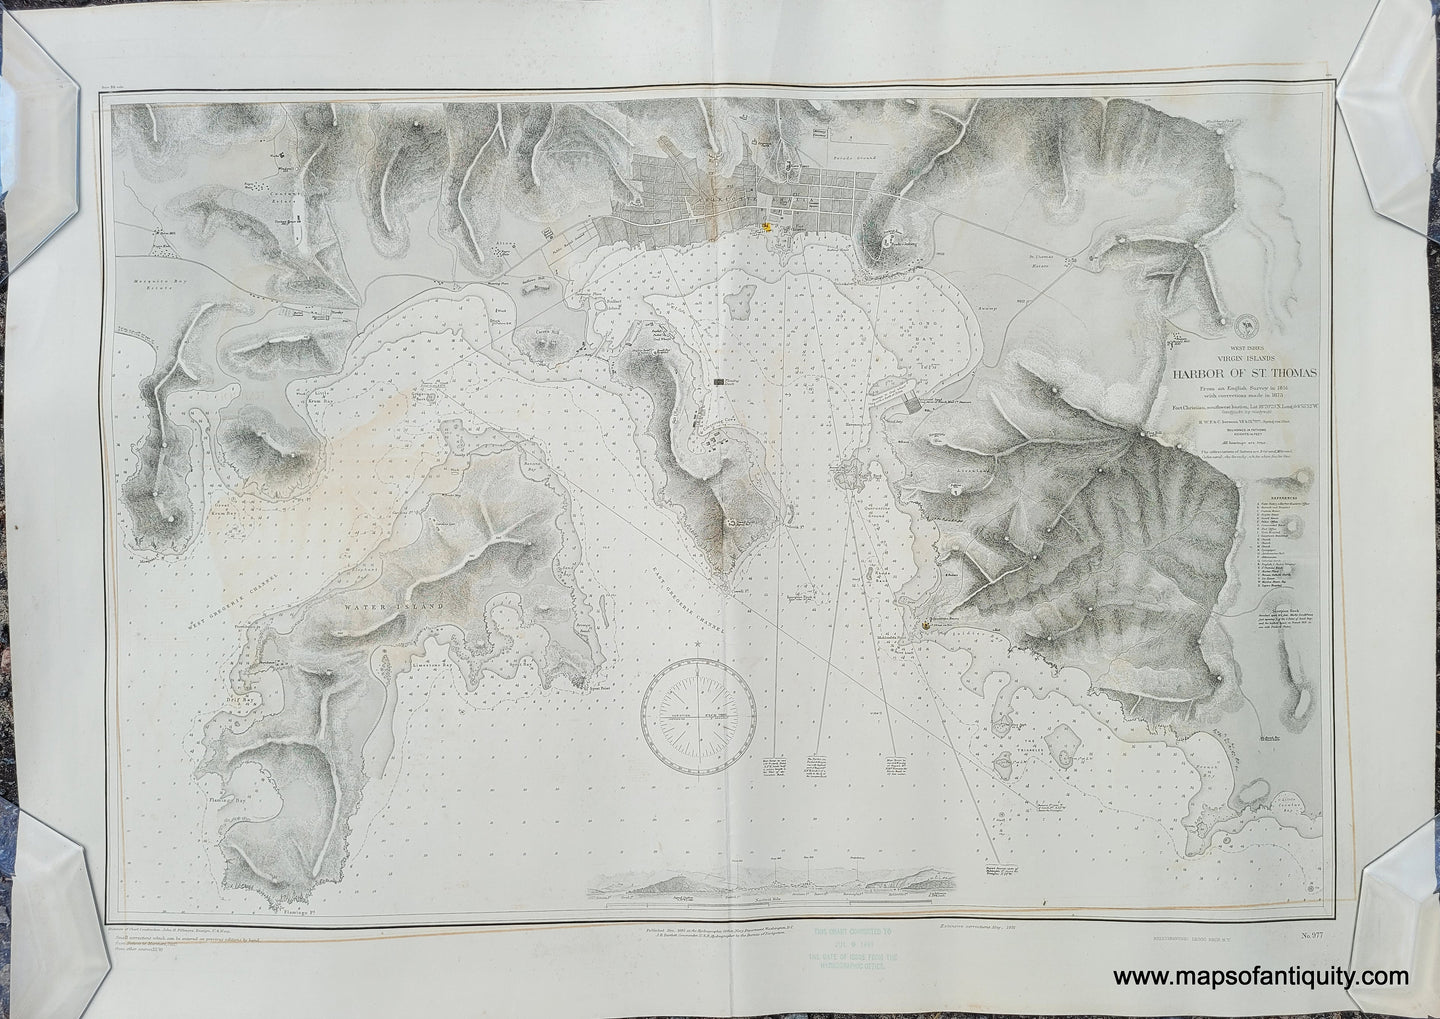 Genuine-Antique-Nautical-Chart-West-Indies-Virgin-Islands-Harbor-of-St-Thomas-1885-1891-US-Hydrographic-Office-of-the-US-Navy-Maps-Of-Antiquity